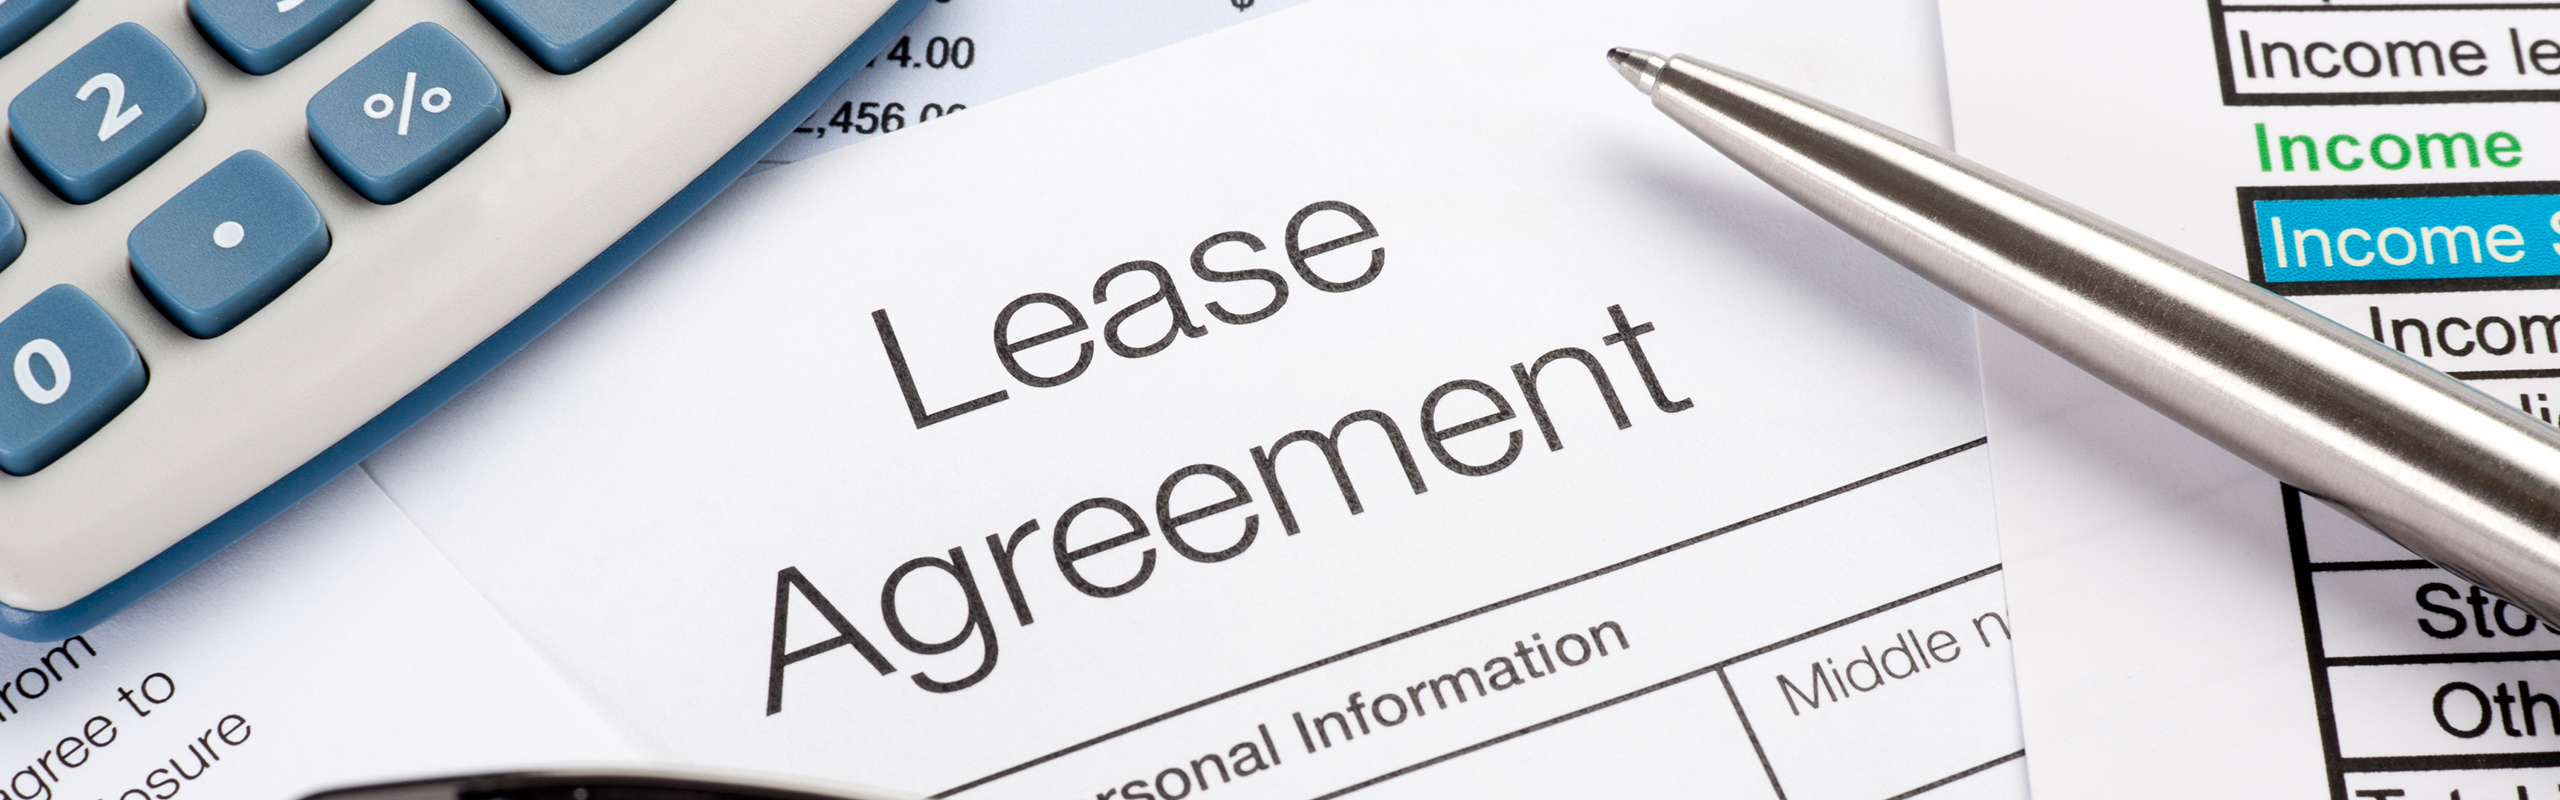 Lease accounting standard update